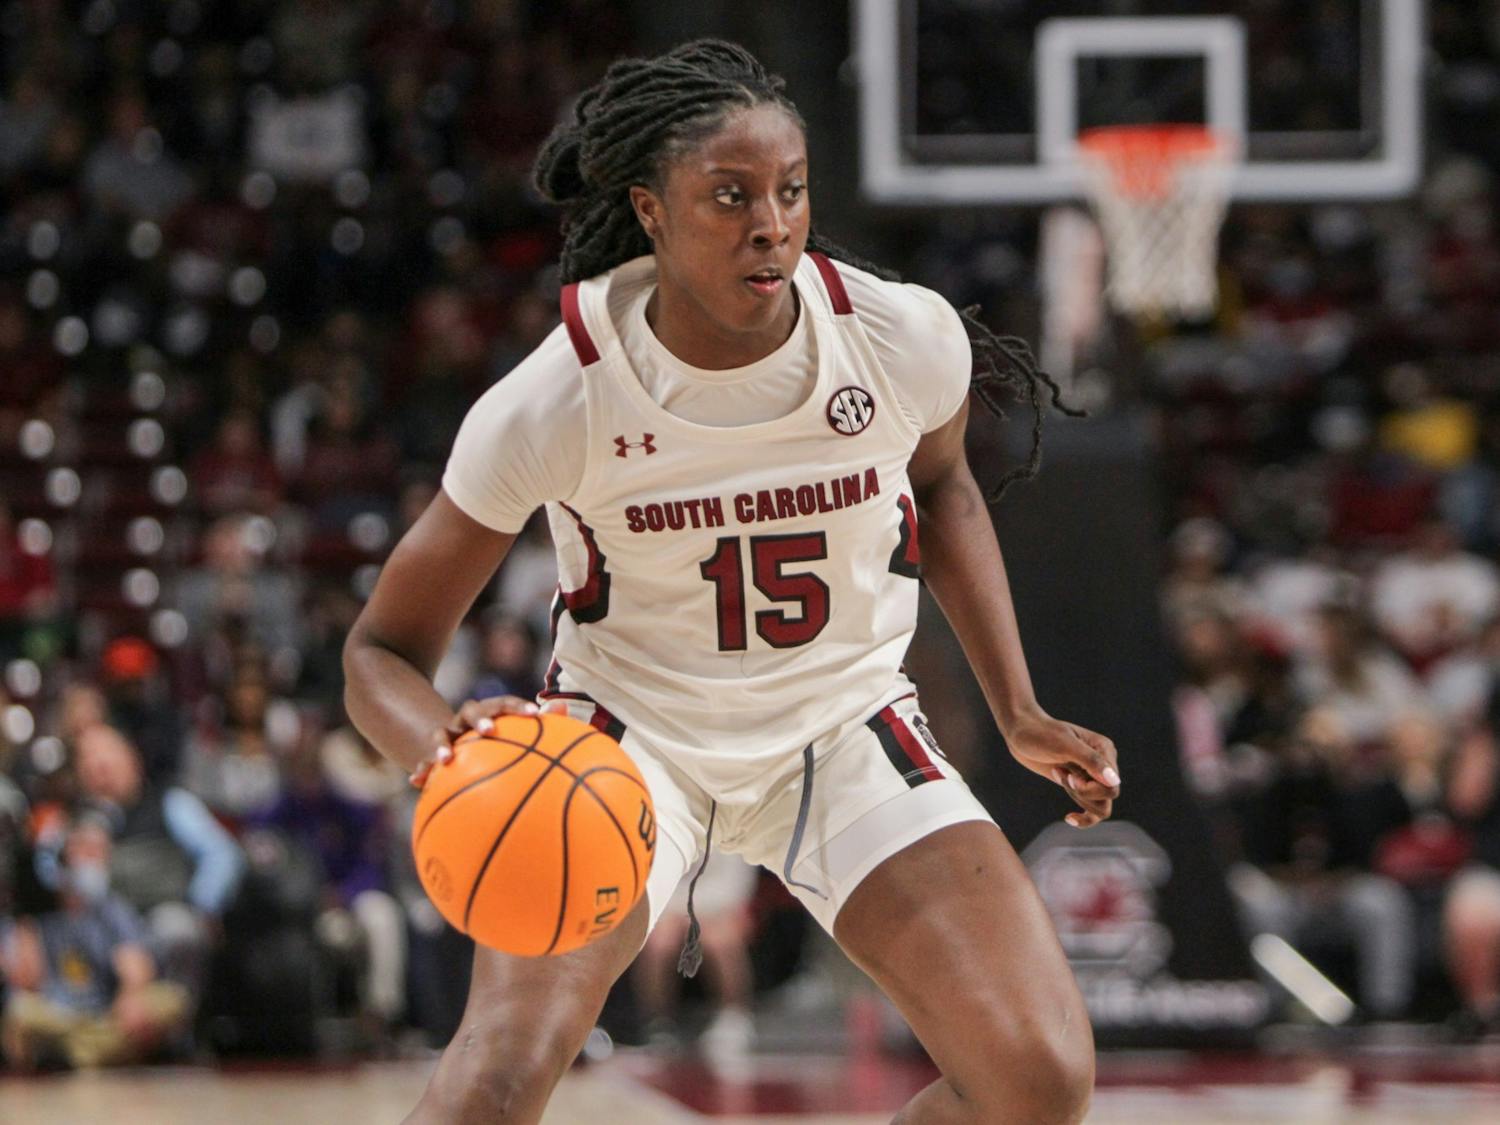 Junior forward Laeticia Amihere works her way toward the basket during a game on Feb. 17, 2022 at Colonial Life Arena in Columbia, SC. The Gamecocks beat Auburn 75-38.